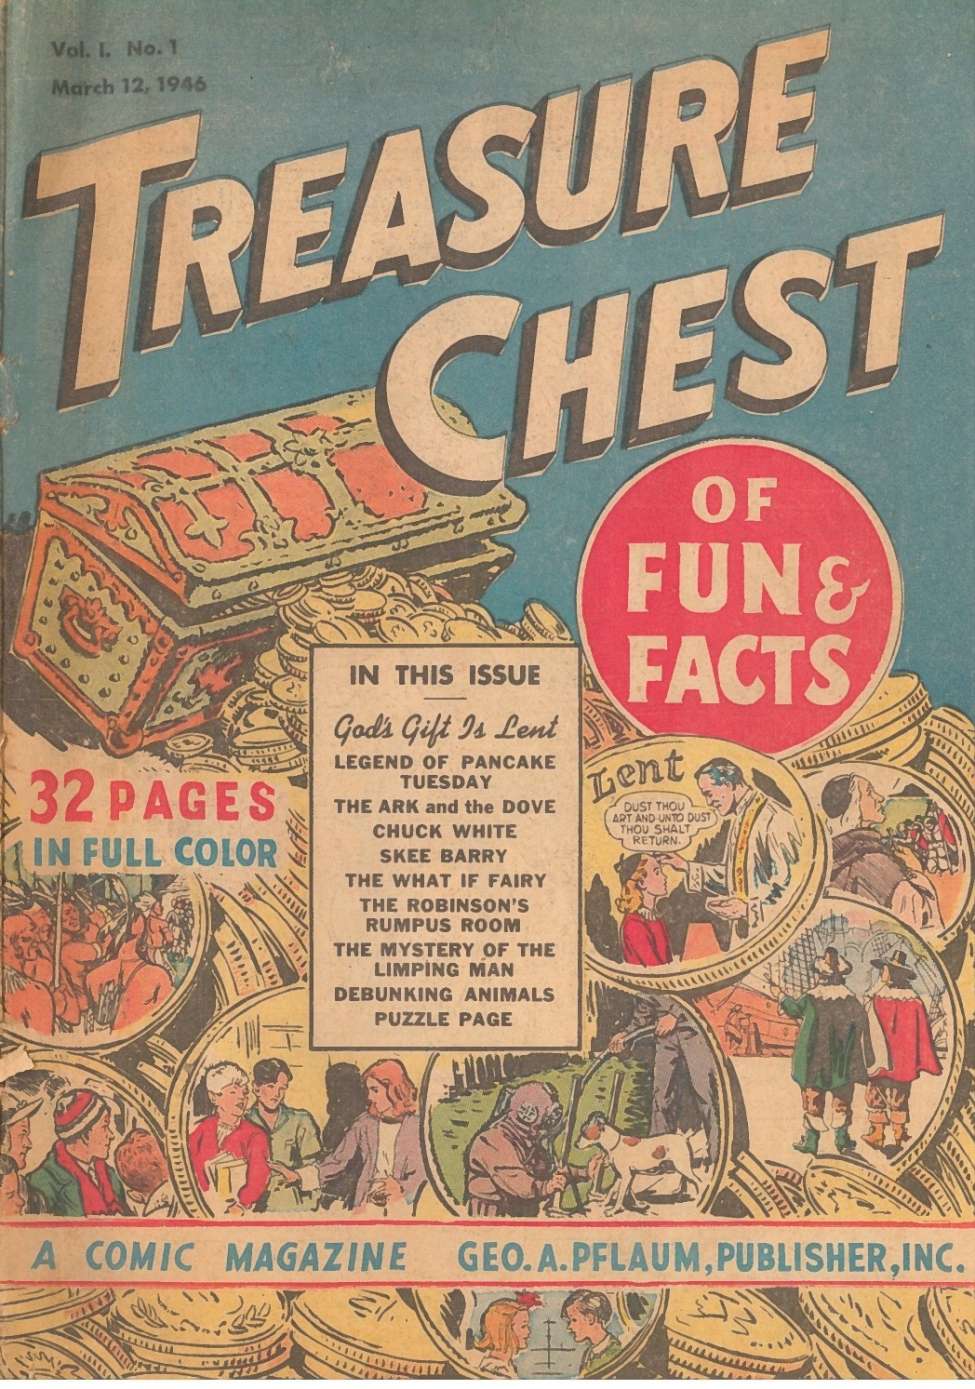 Comic Book Cover For Treasure Chest of Fun and Fact v1 1